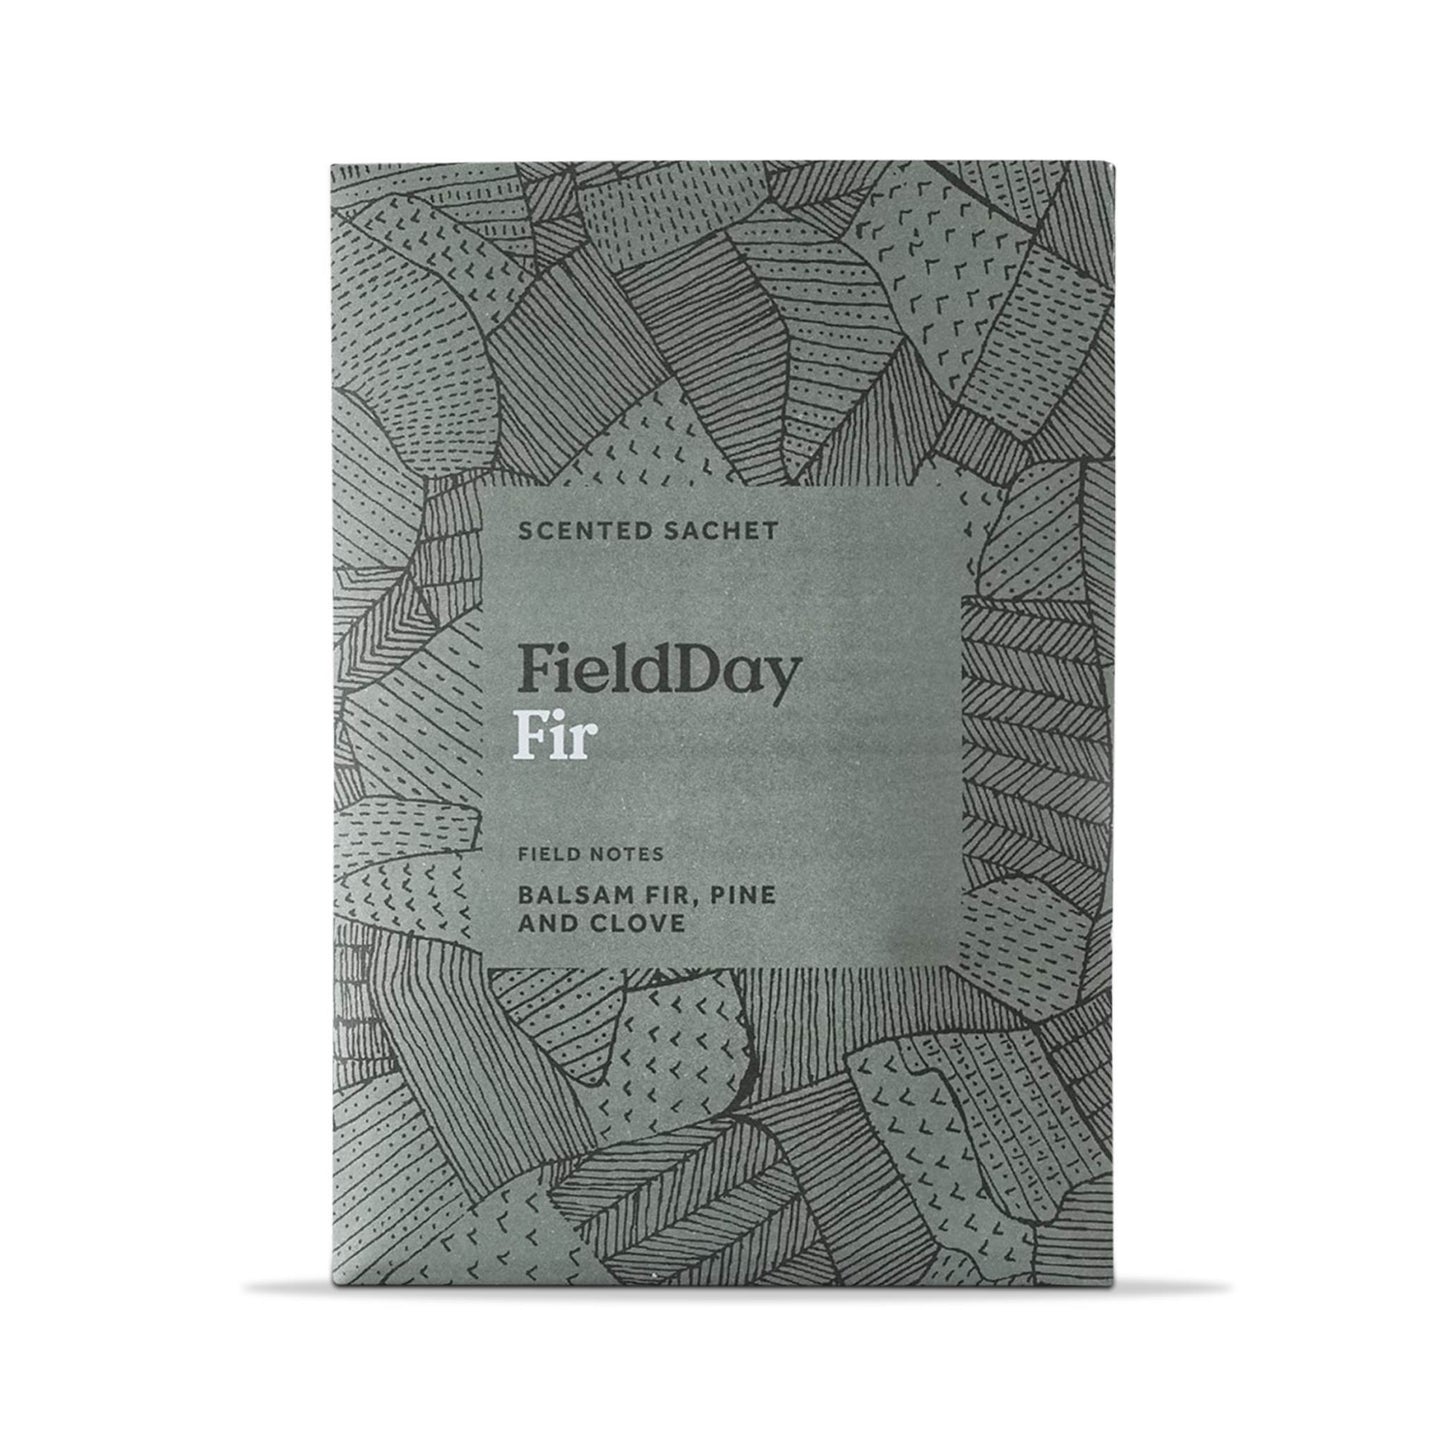 FieldDay Home Fragrance FieldDay Classic Collection Scented Sachet - Fir